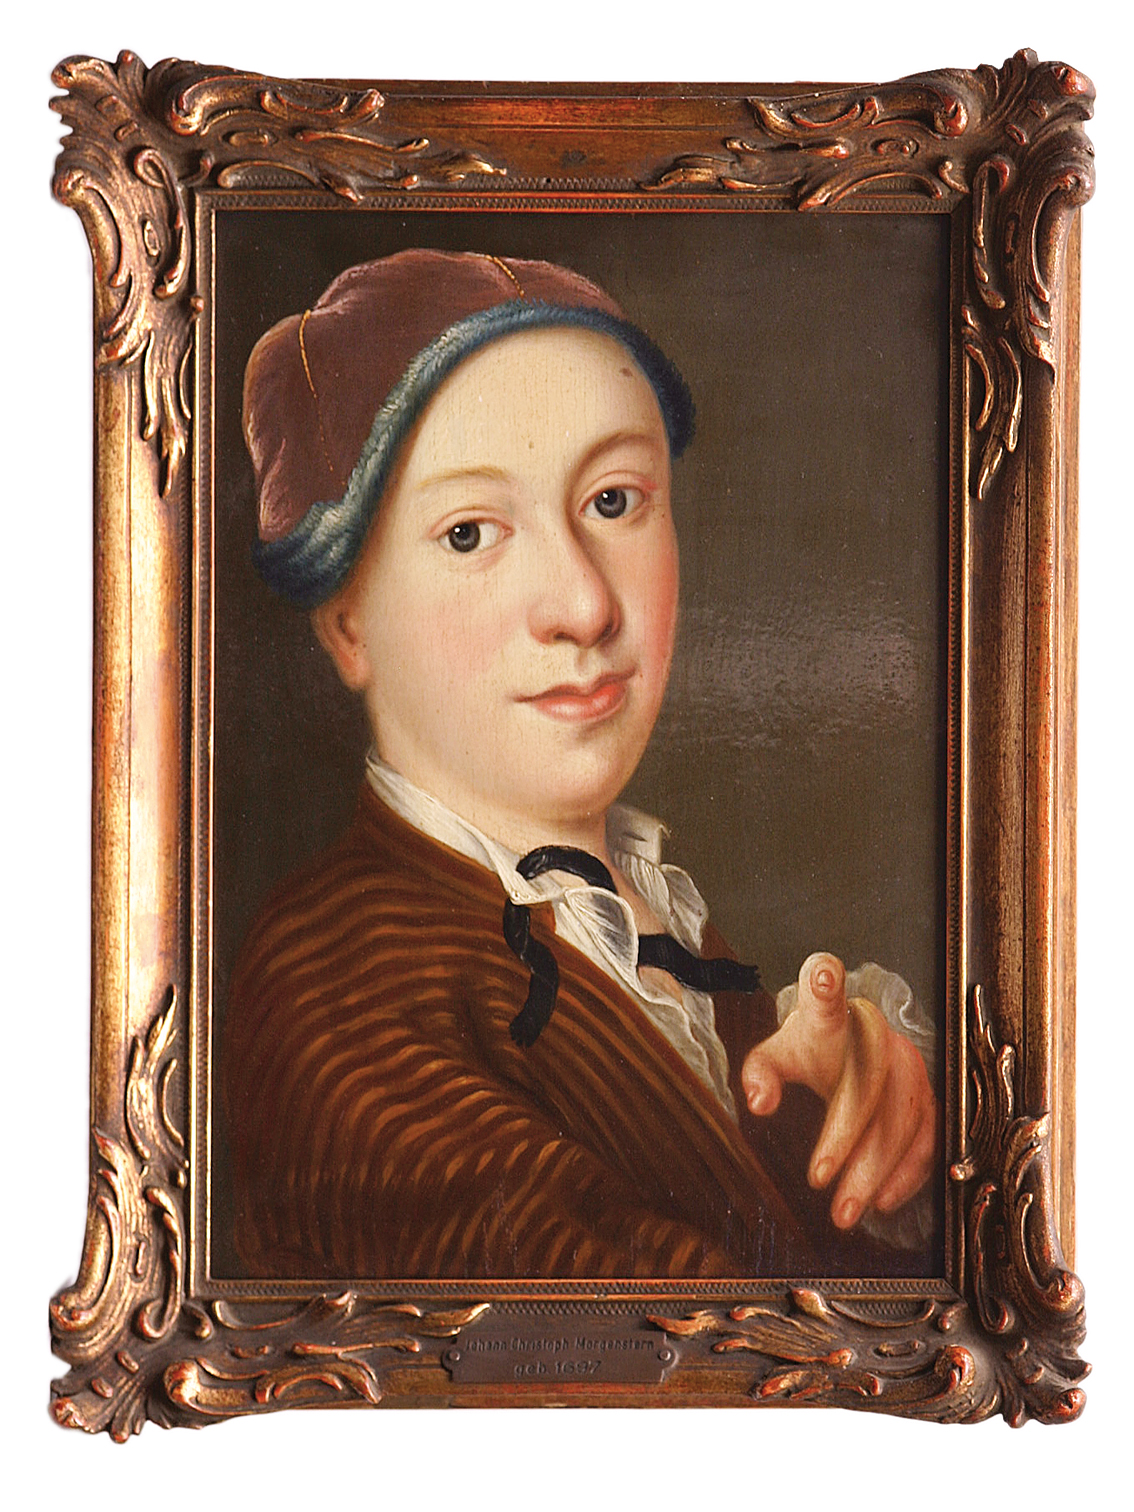 A portrait of a young man